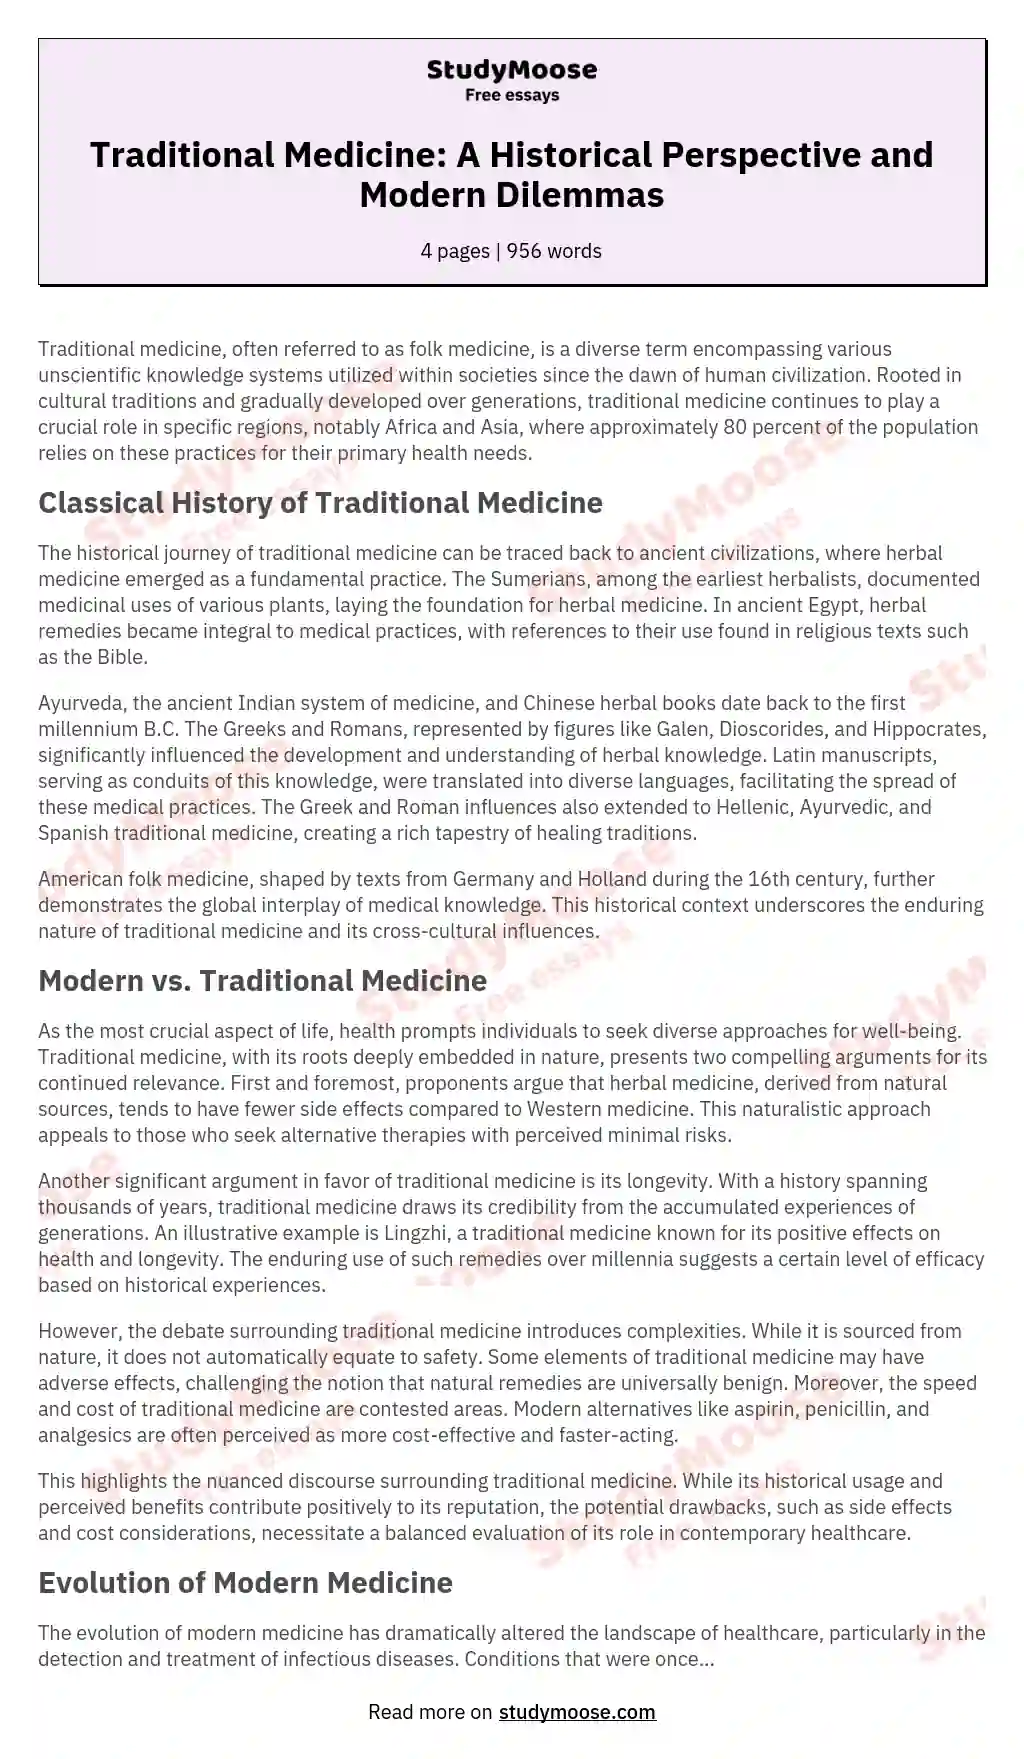 Traditional Medicine: A Historical Perspective and Modern Dilemmas essay